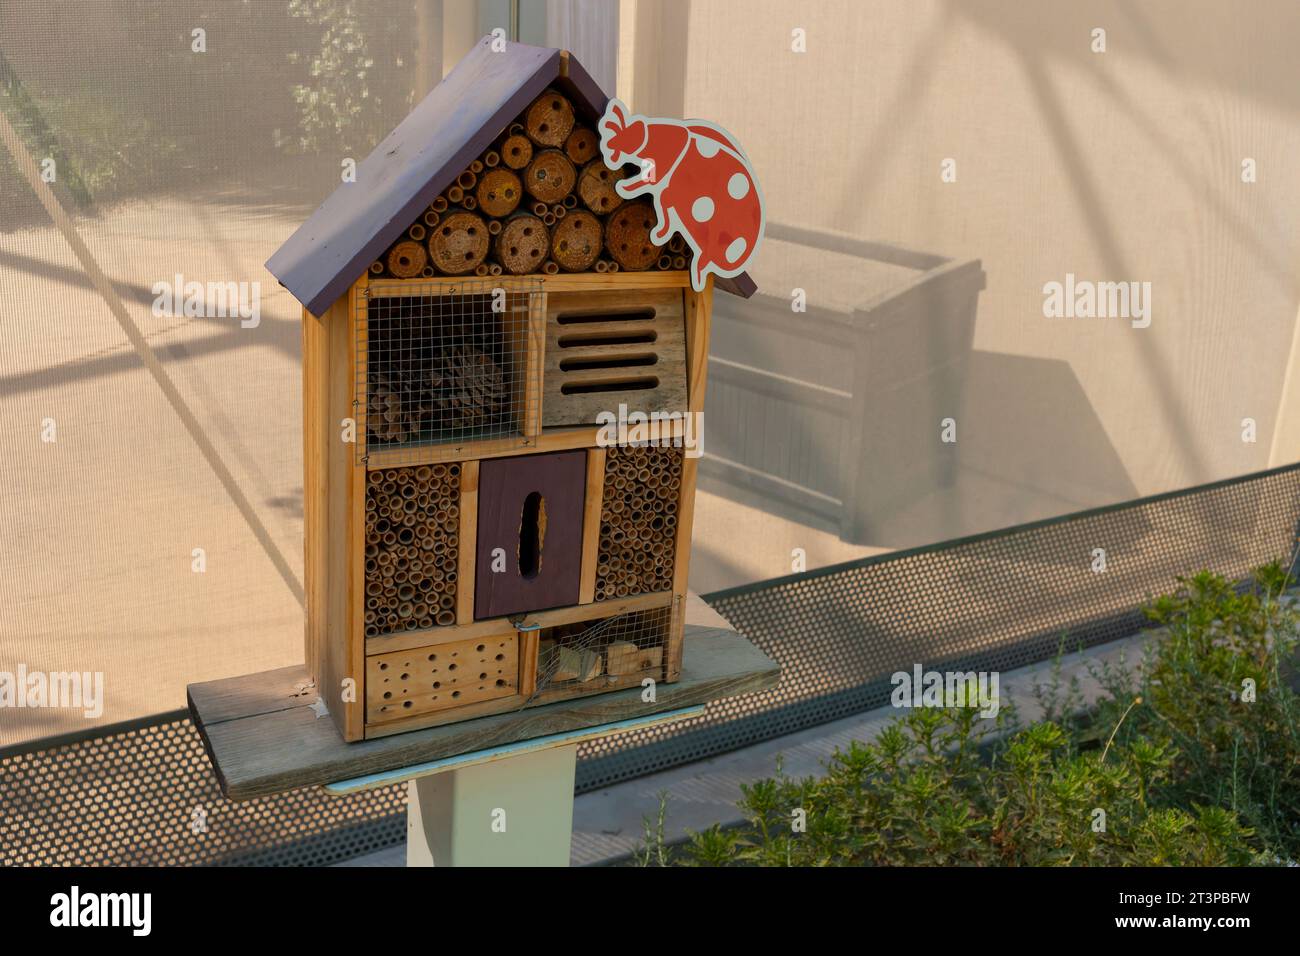 Bug Hotel, Wooden Insect House, Ladybird And Bee, Fly. Compartments And Natural Components. Outdoor Eco Home For Butterfly Hibernation And Ecological Stock Photo